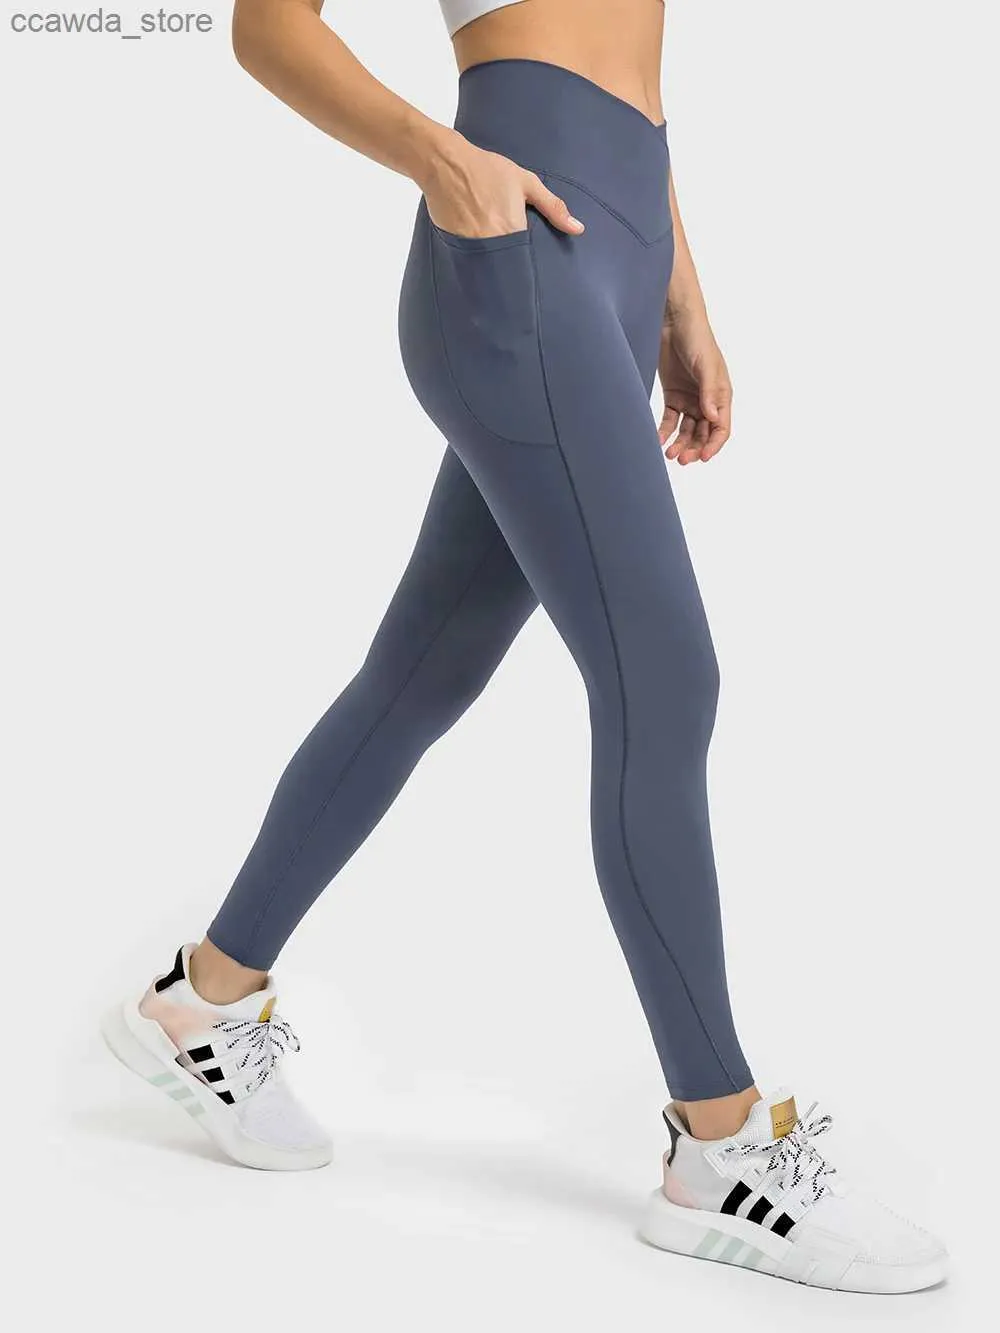 Womens Leggings Nepoagym 25 No Front Seam Women Leggings With Side